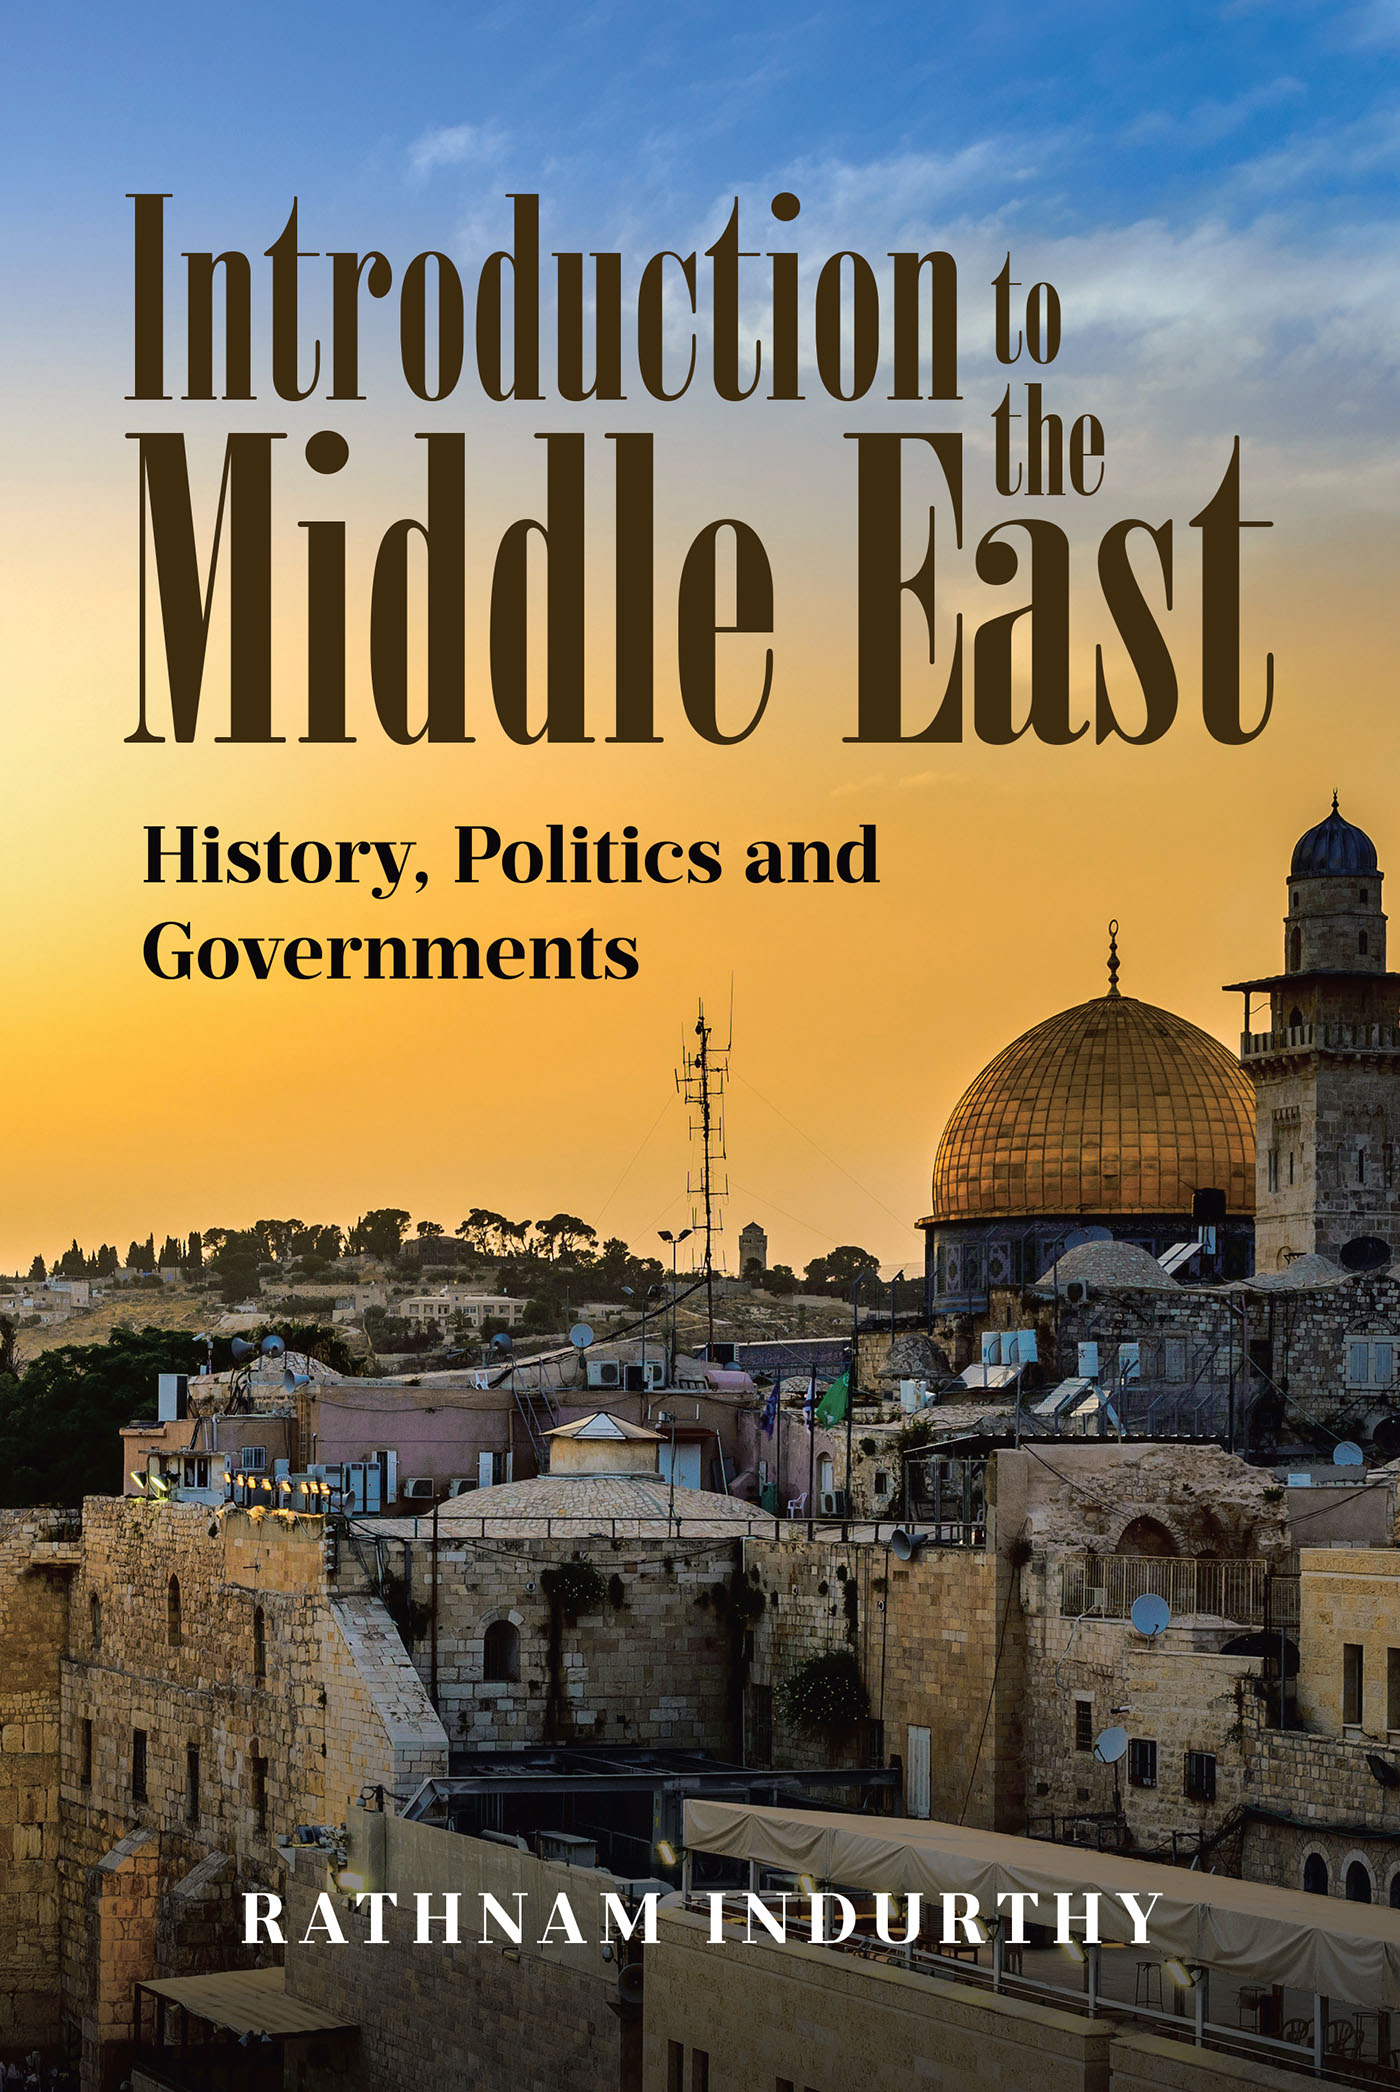 Author Rathnam Indurthy’s New Book, "Introduction to the Middle East: History, Politics and Governments," Provides Readers with an Understanding of the Titular Region